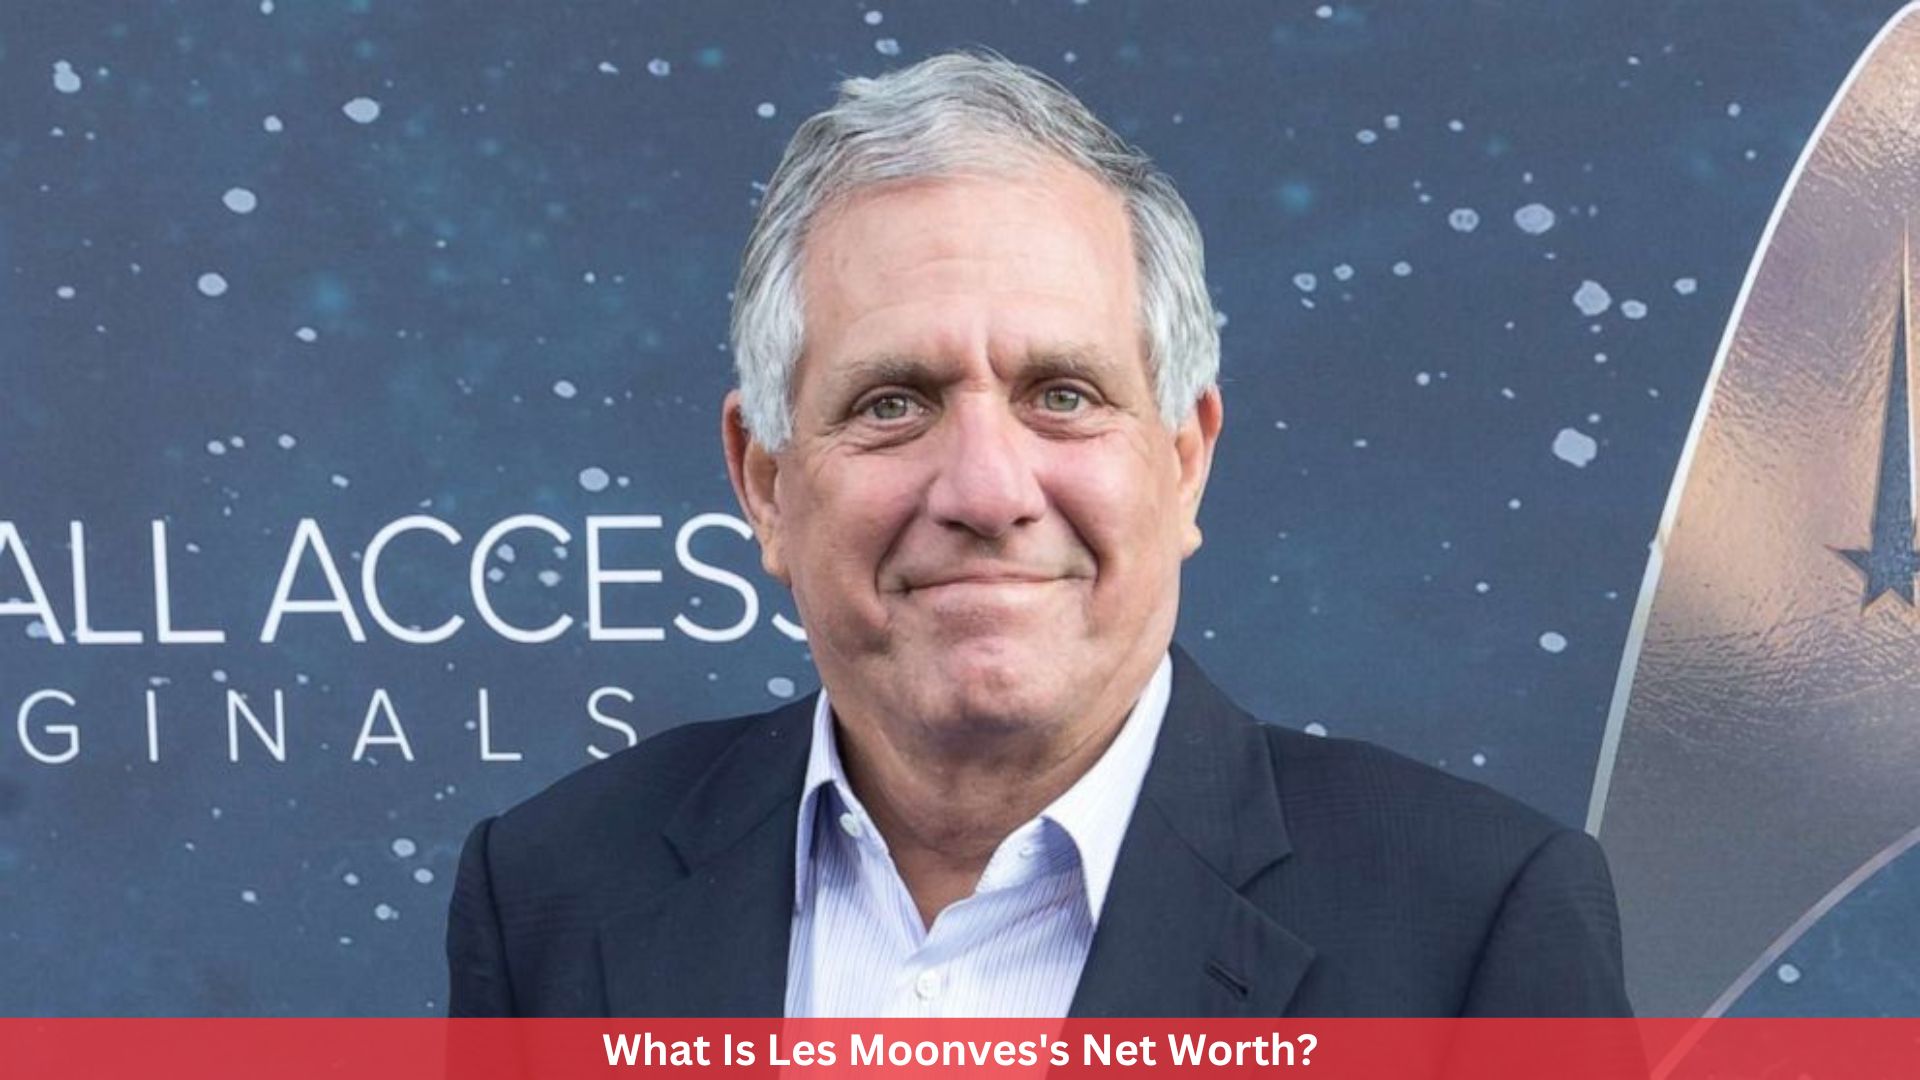 What Is Les Moonves's Net Worth?